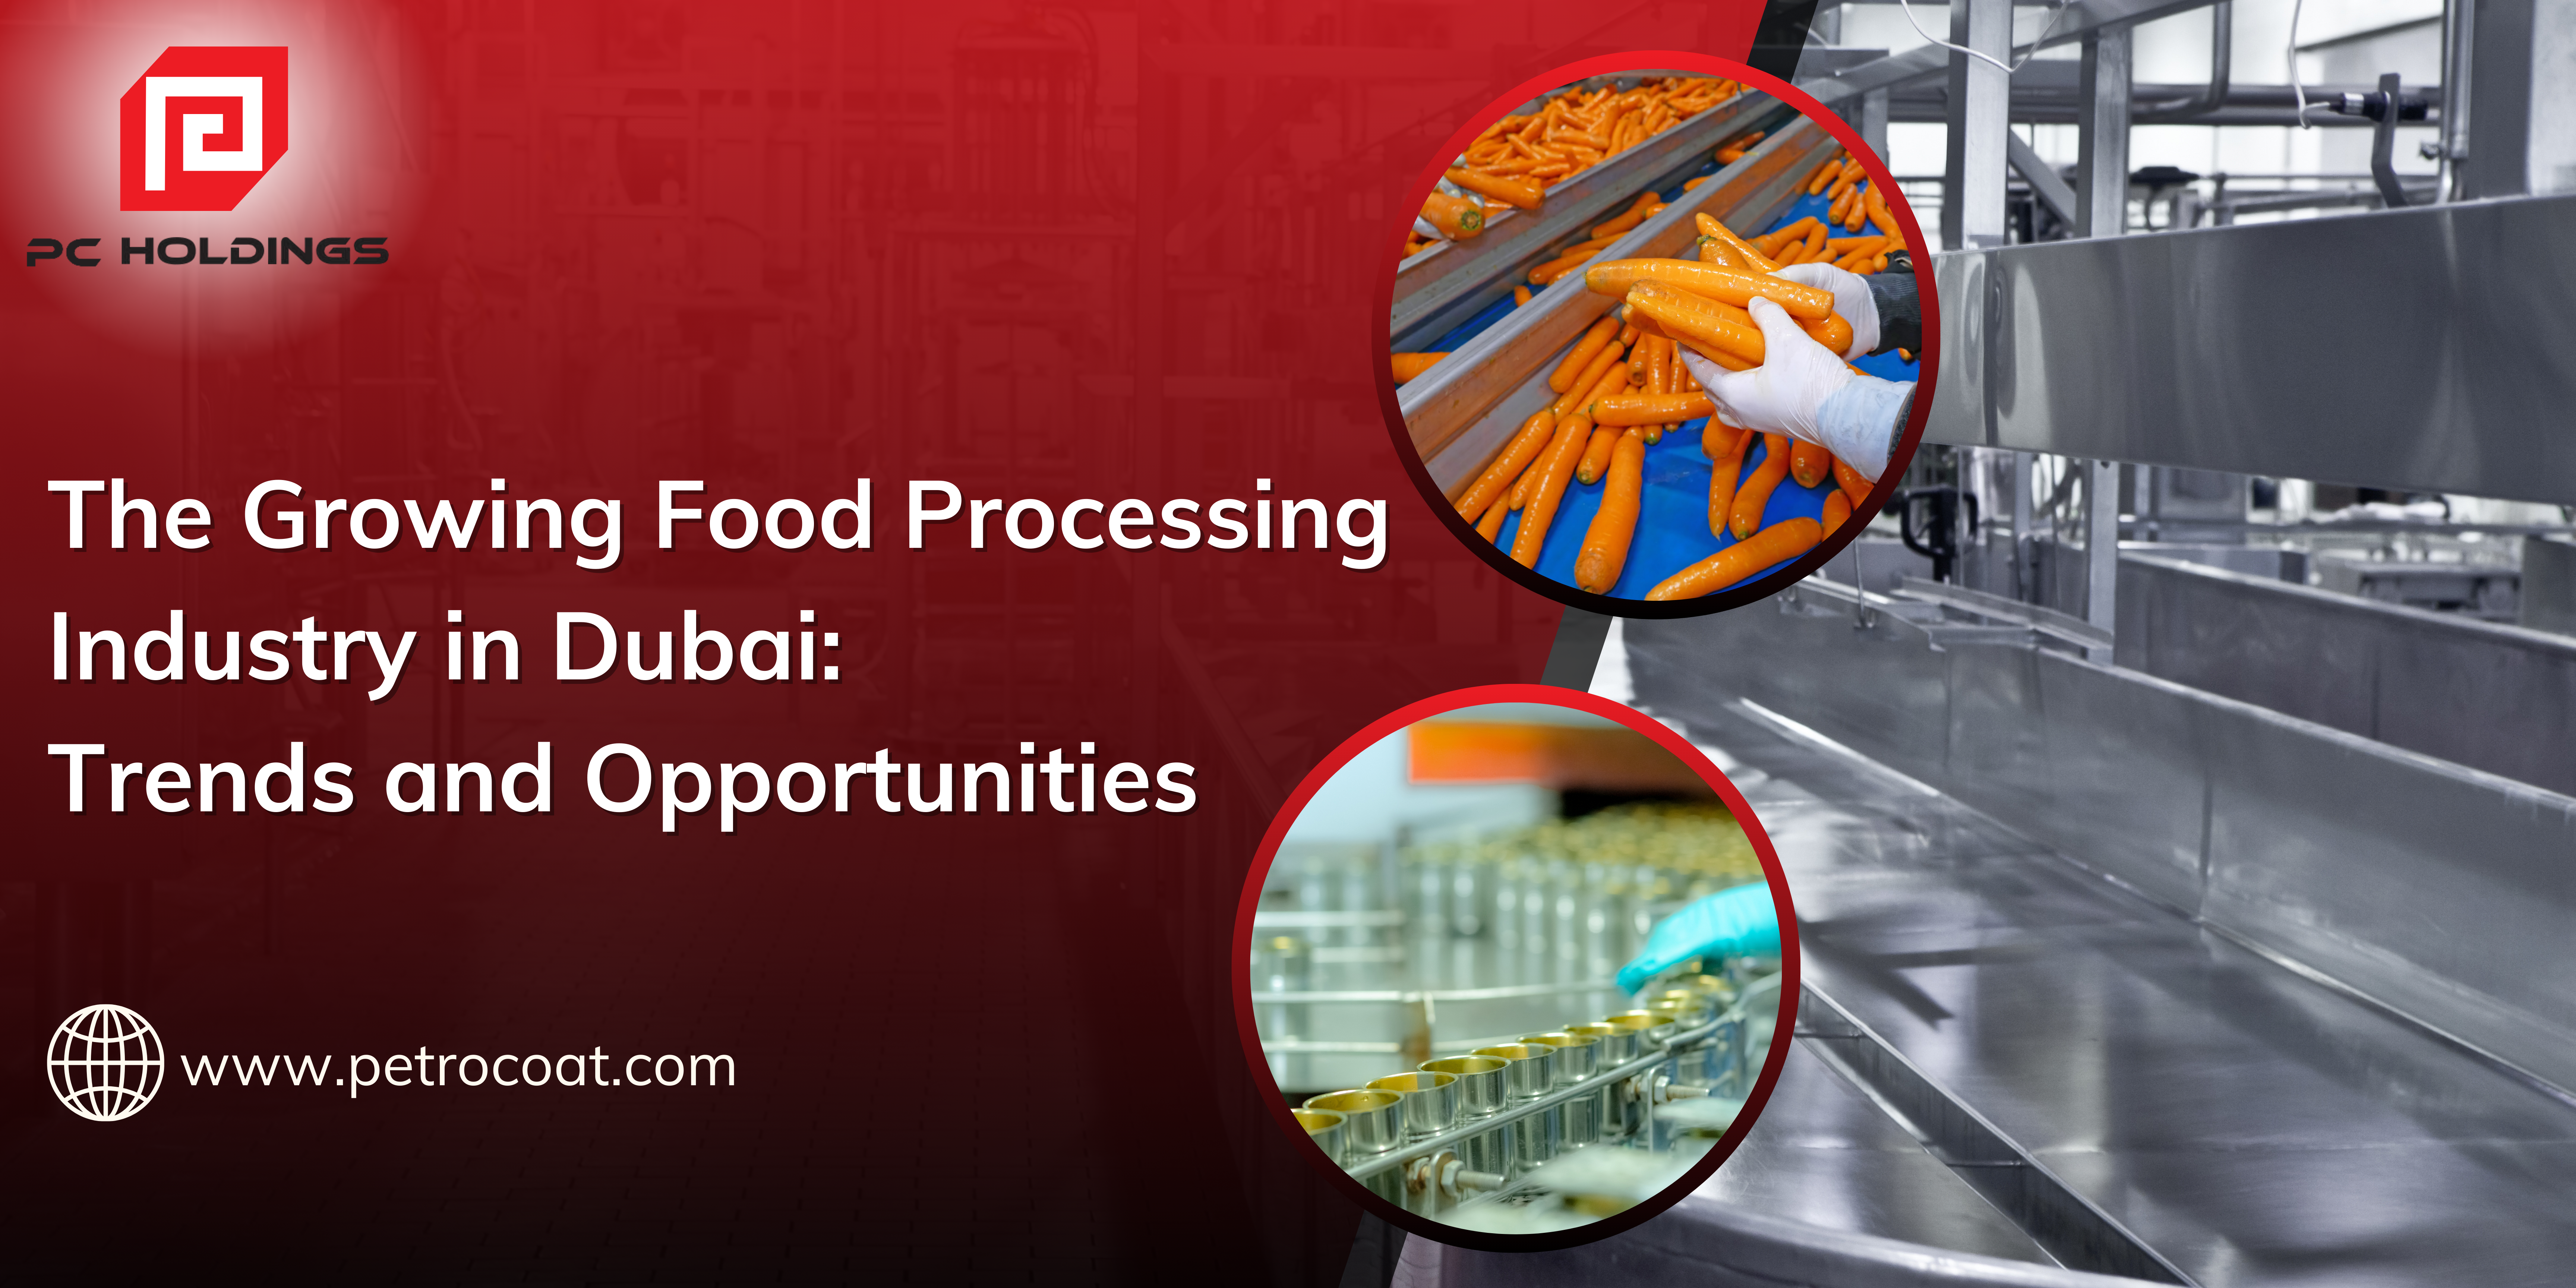 The Growing Food Processing Industry in Dubai: Trends and Opportunities